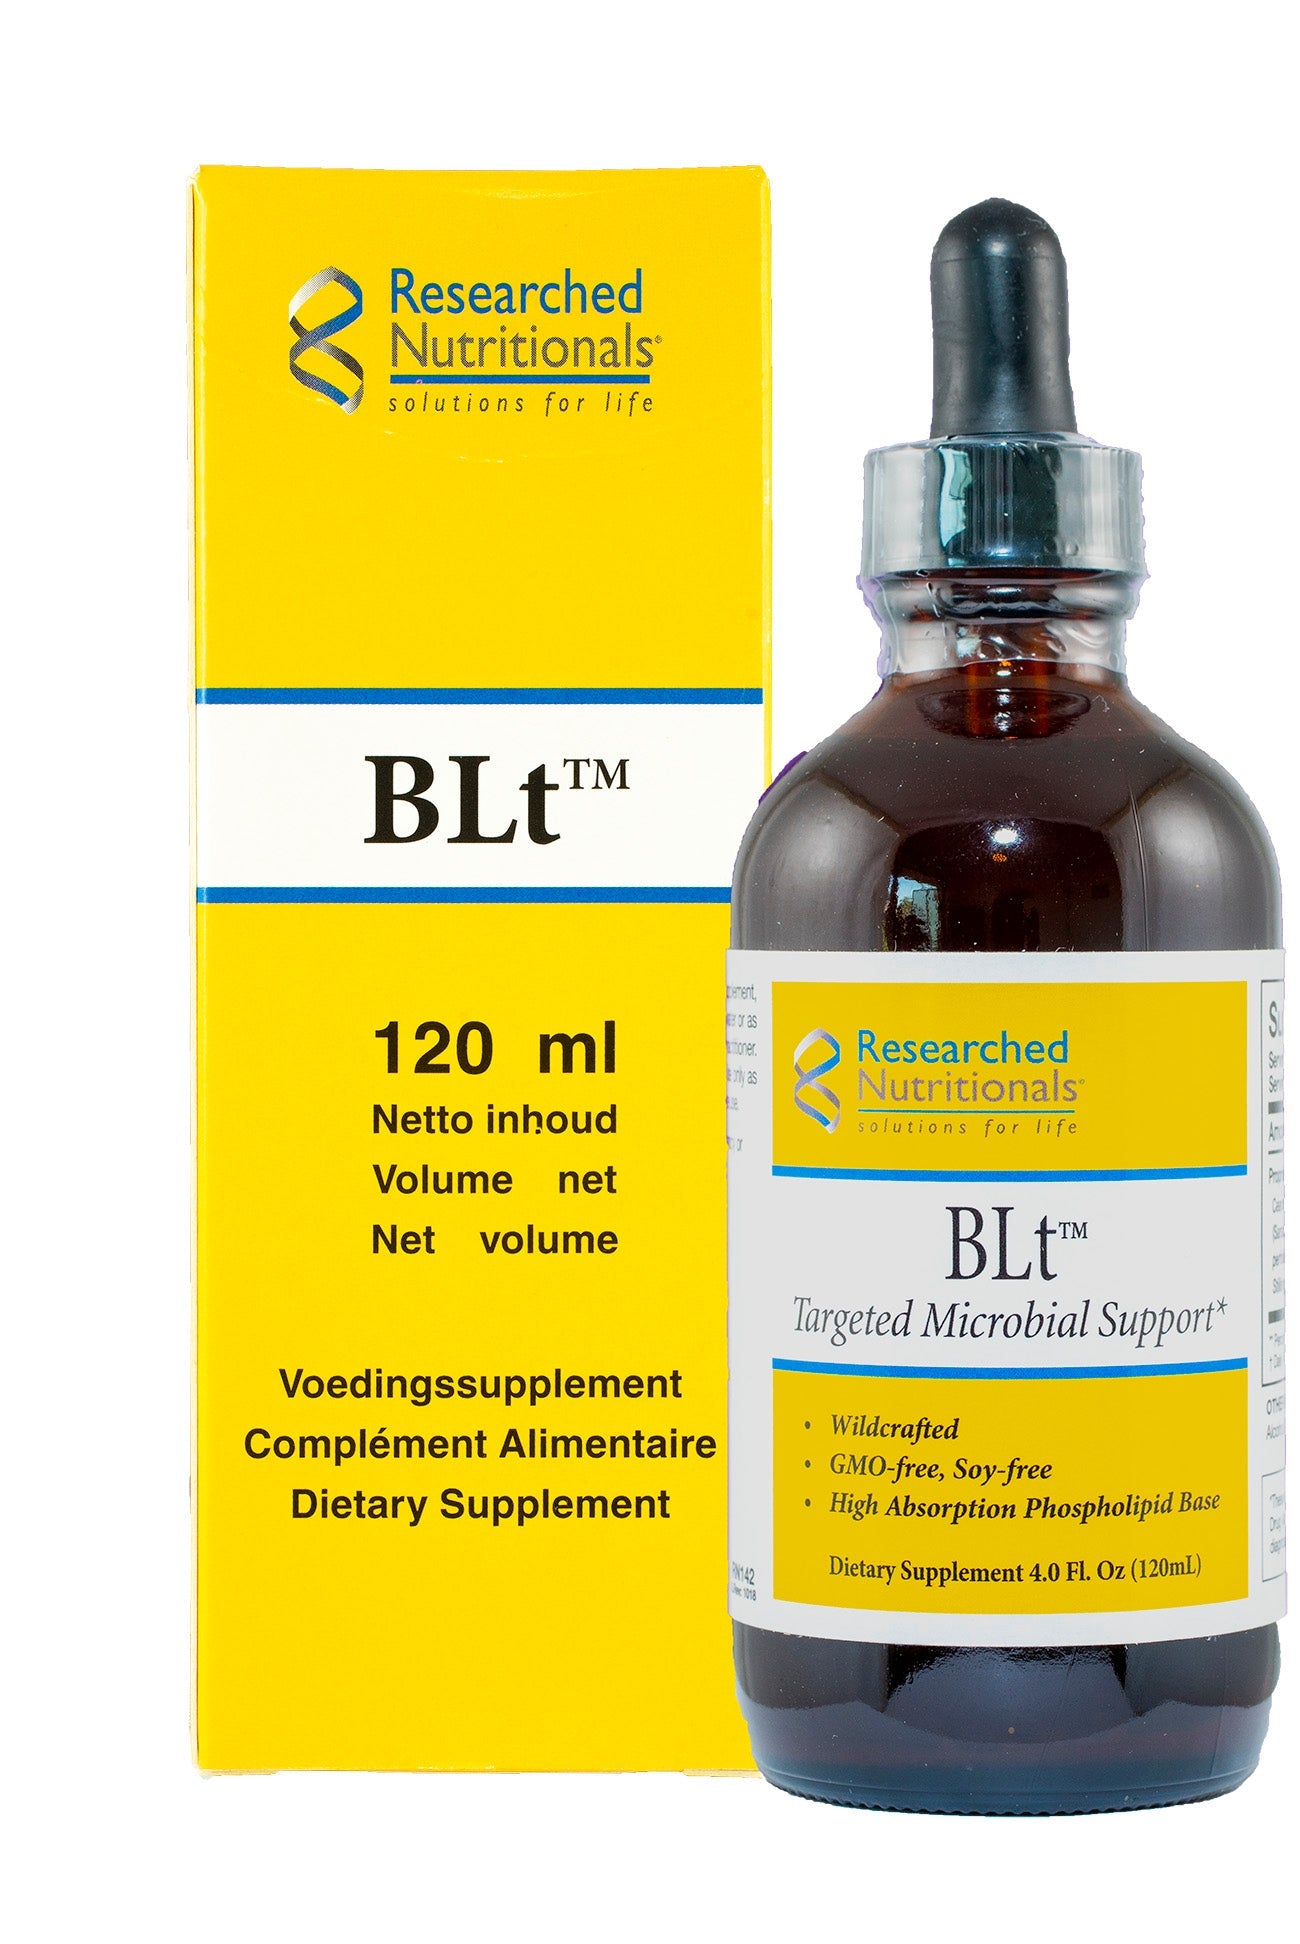 BLt Microbial Balancer #1 - 120ml | Researched Nutritionals